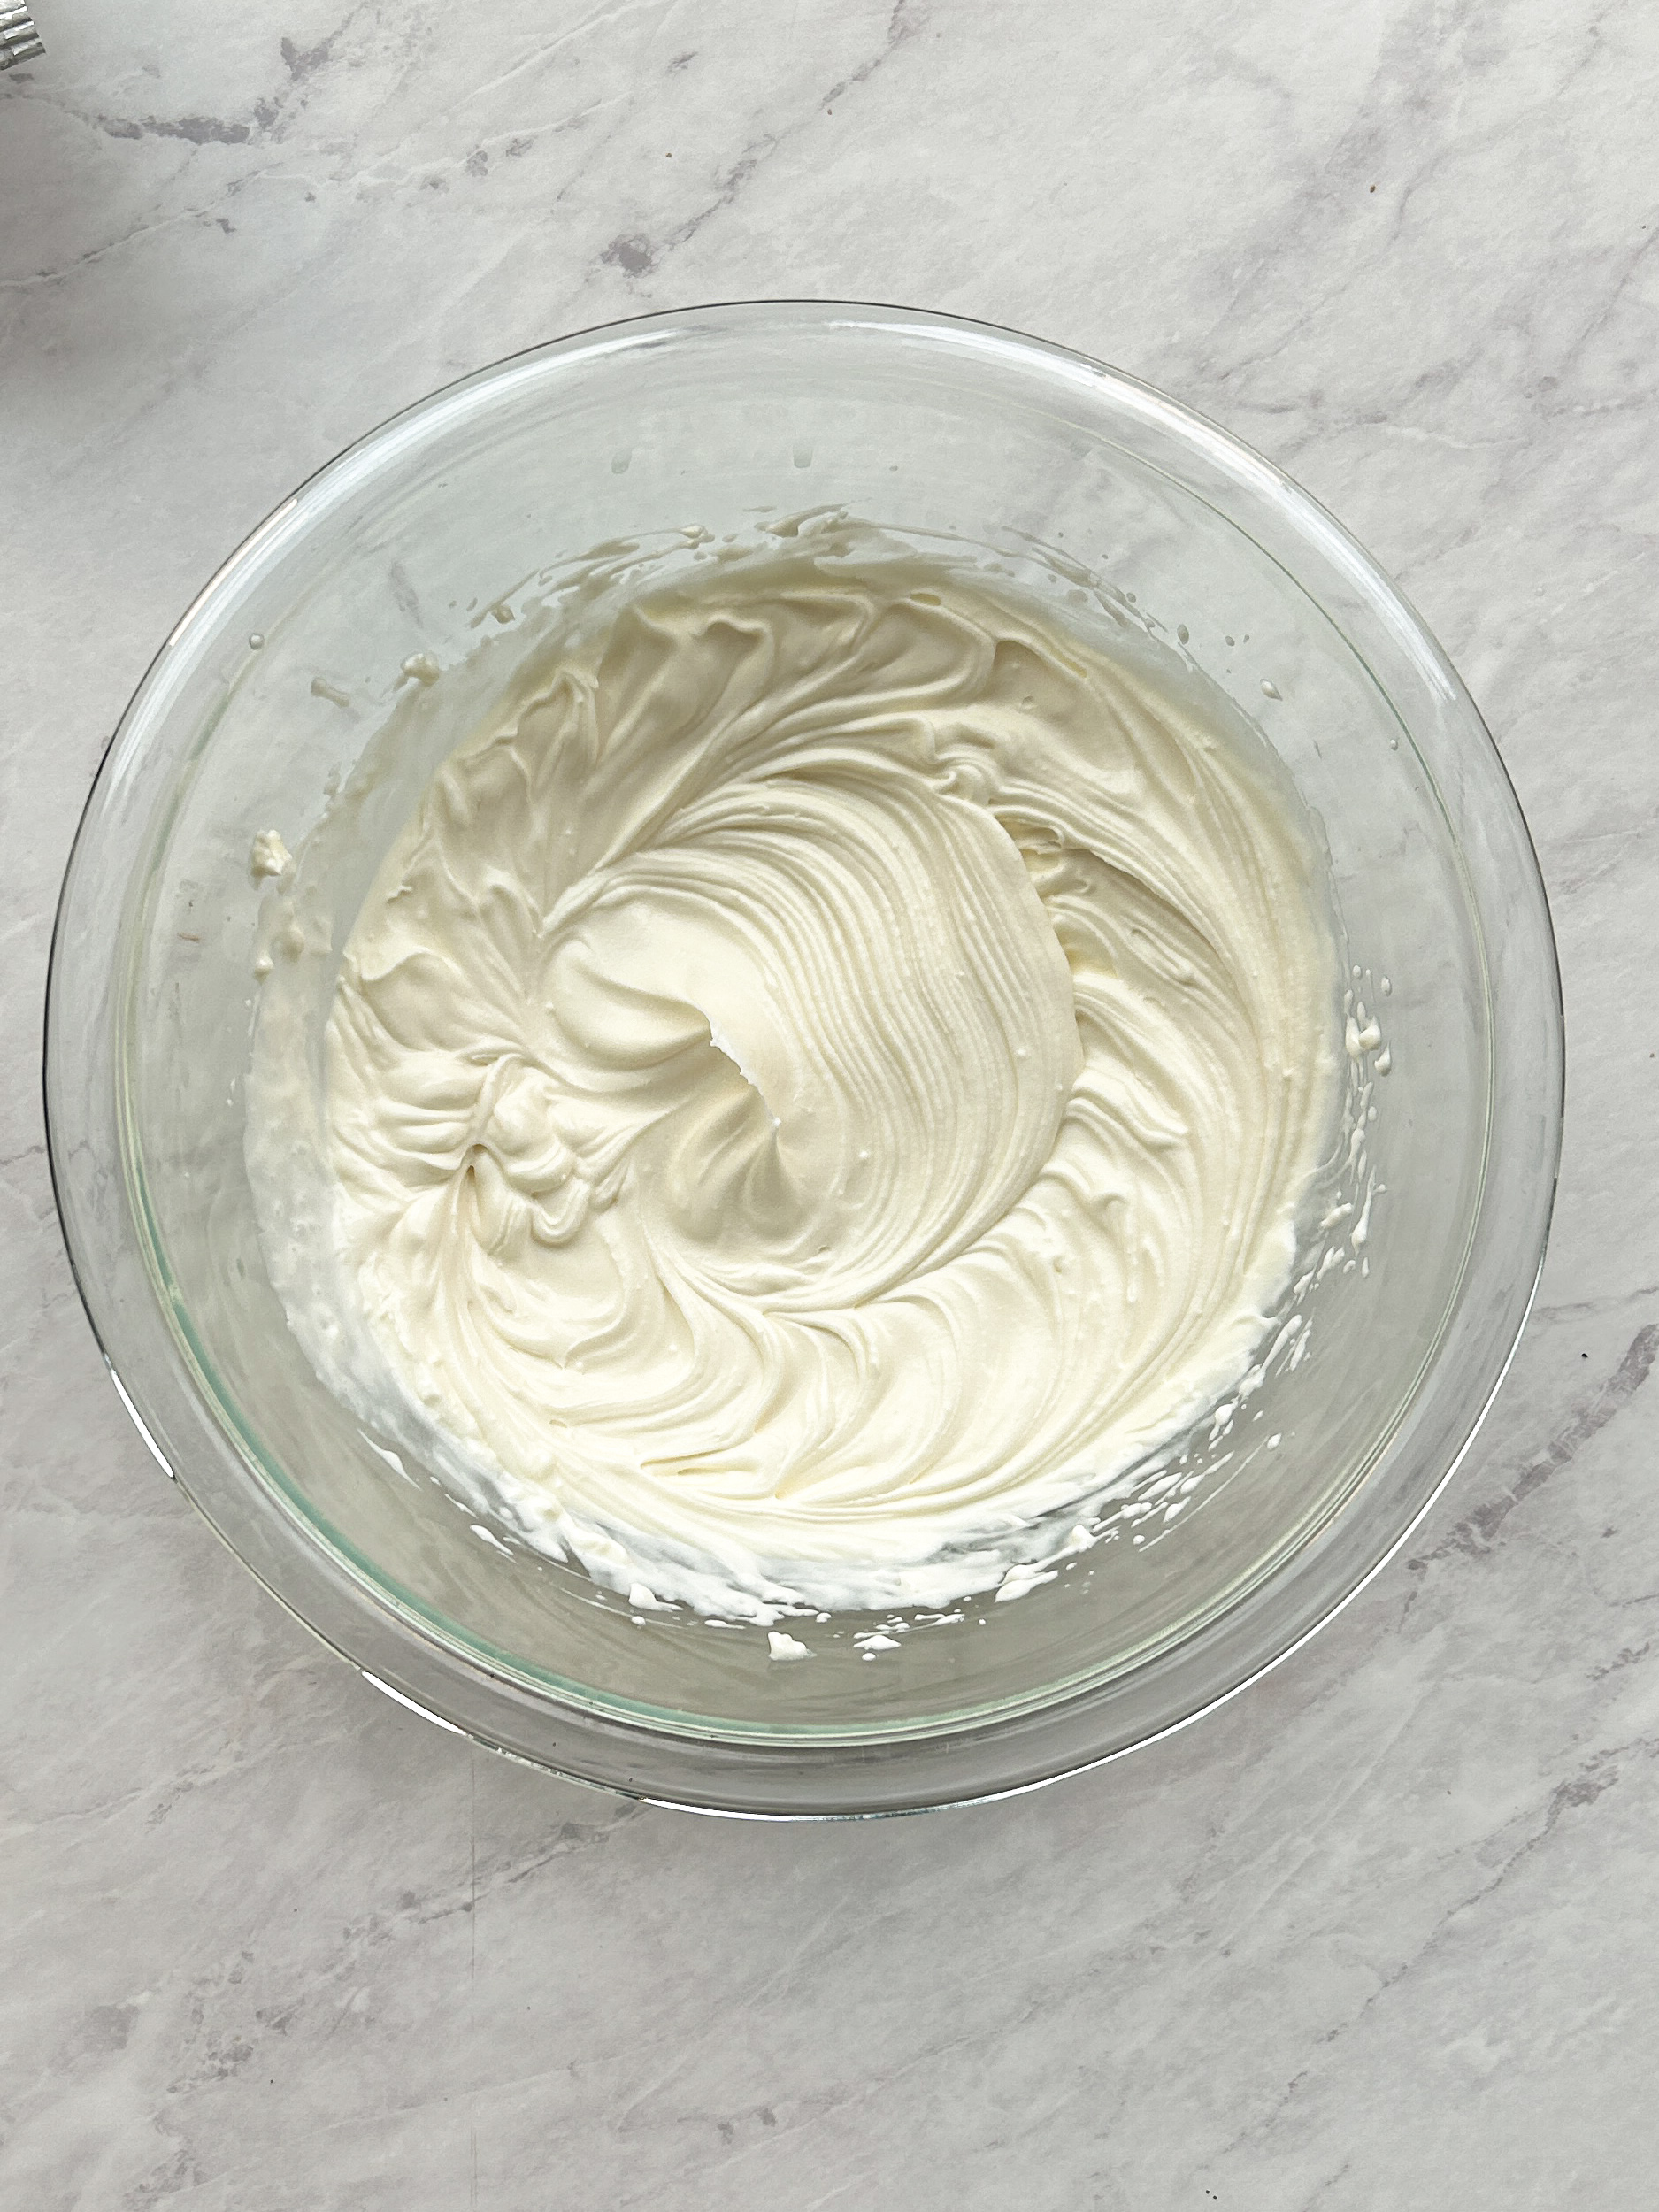 cream cheese filling in a glass bowl